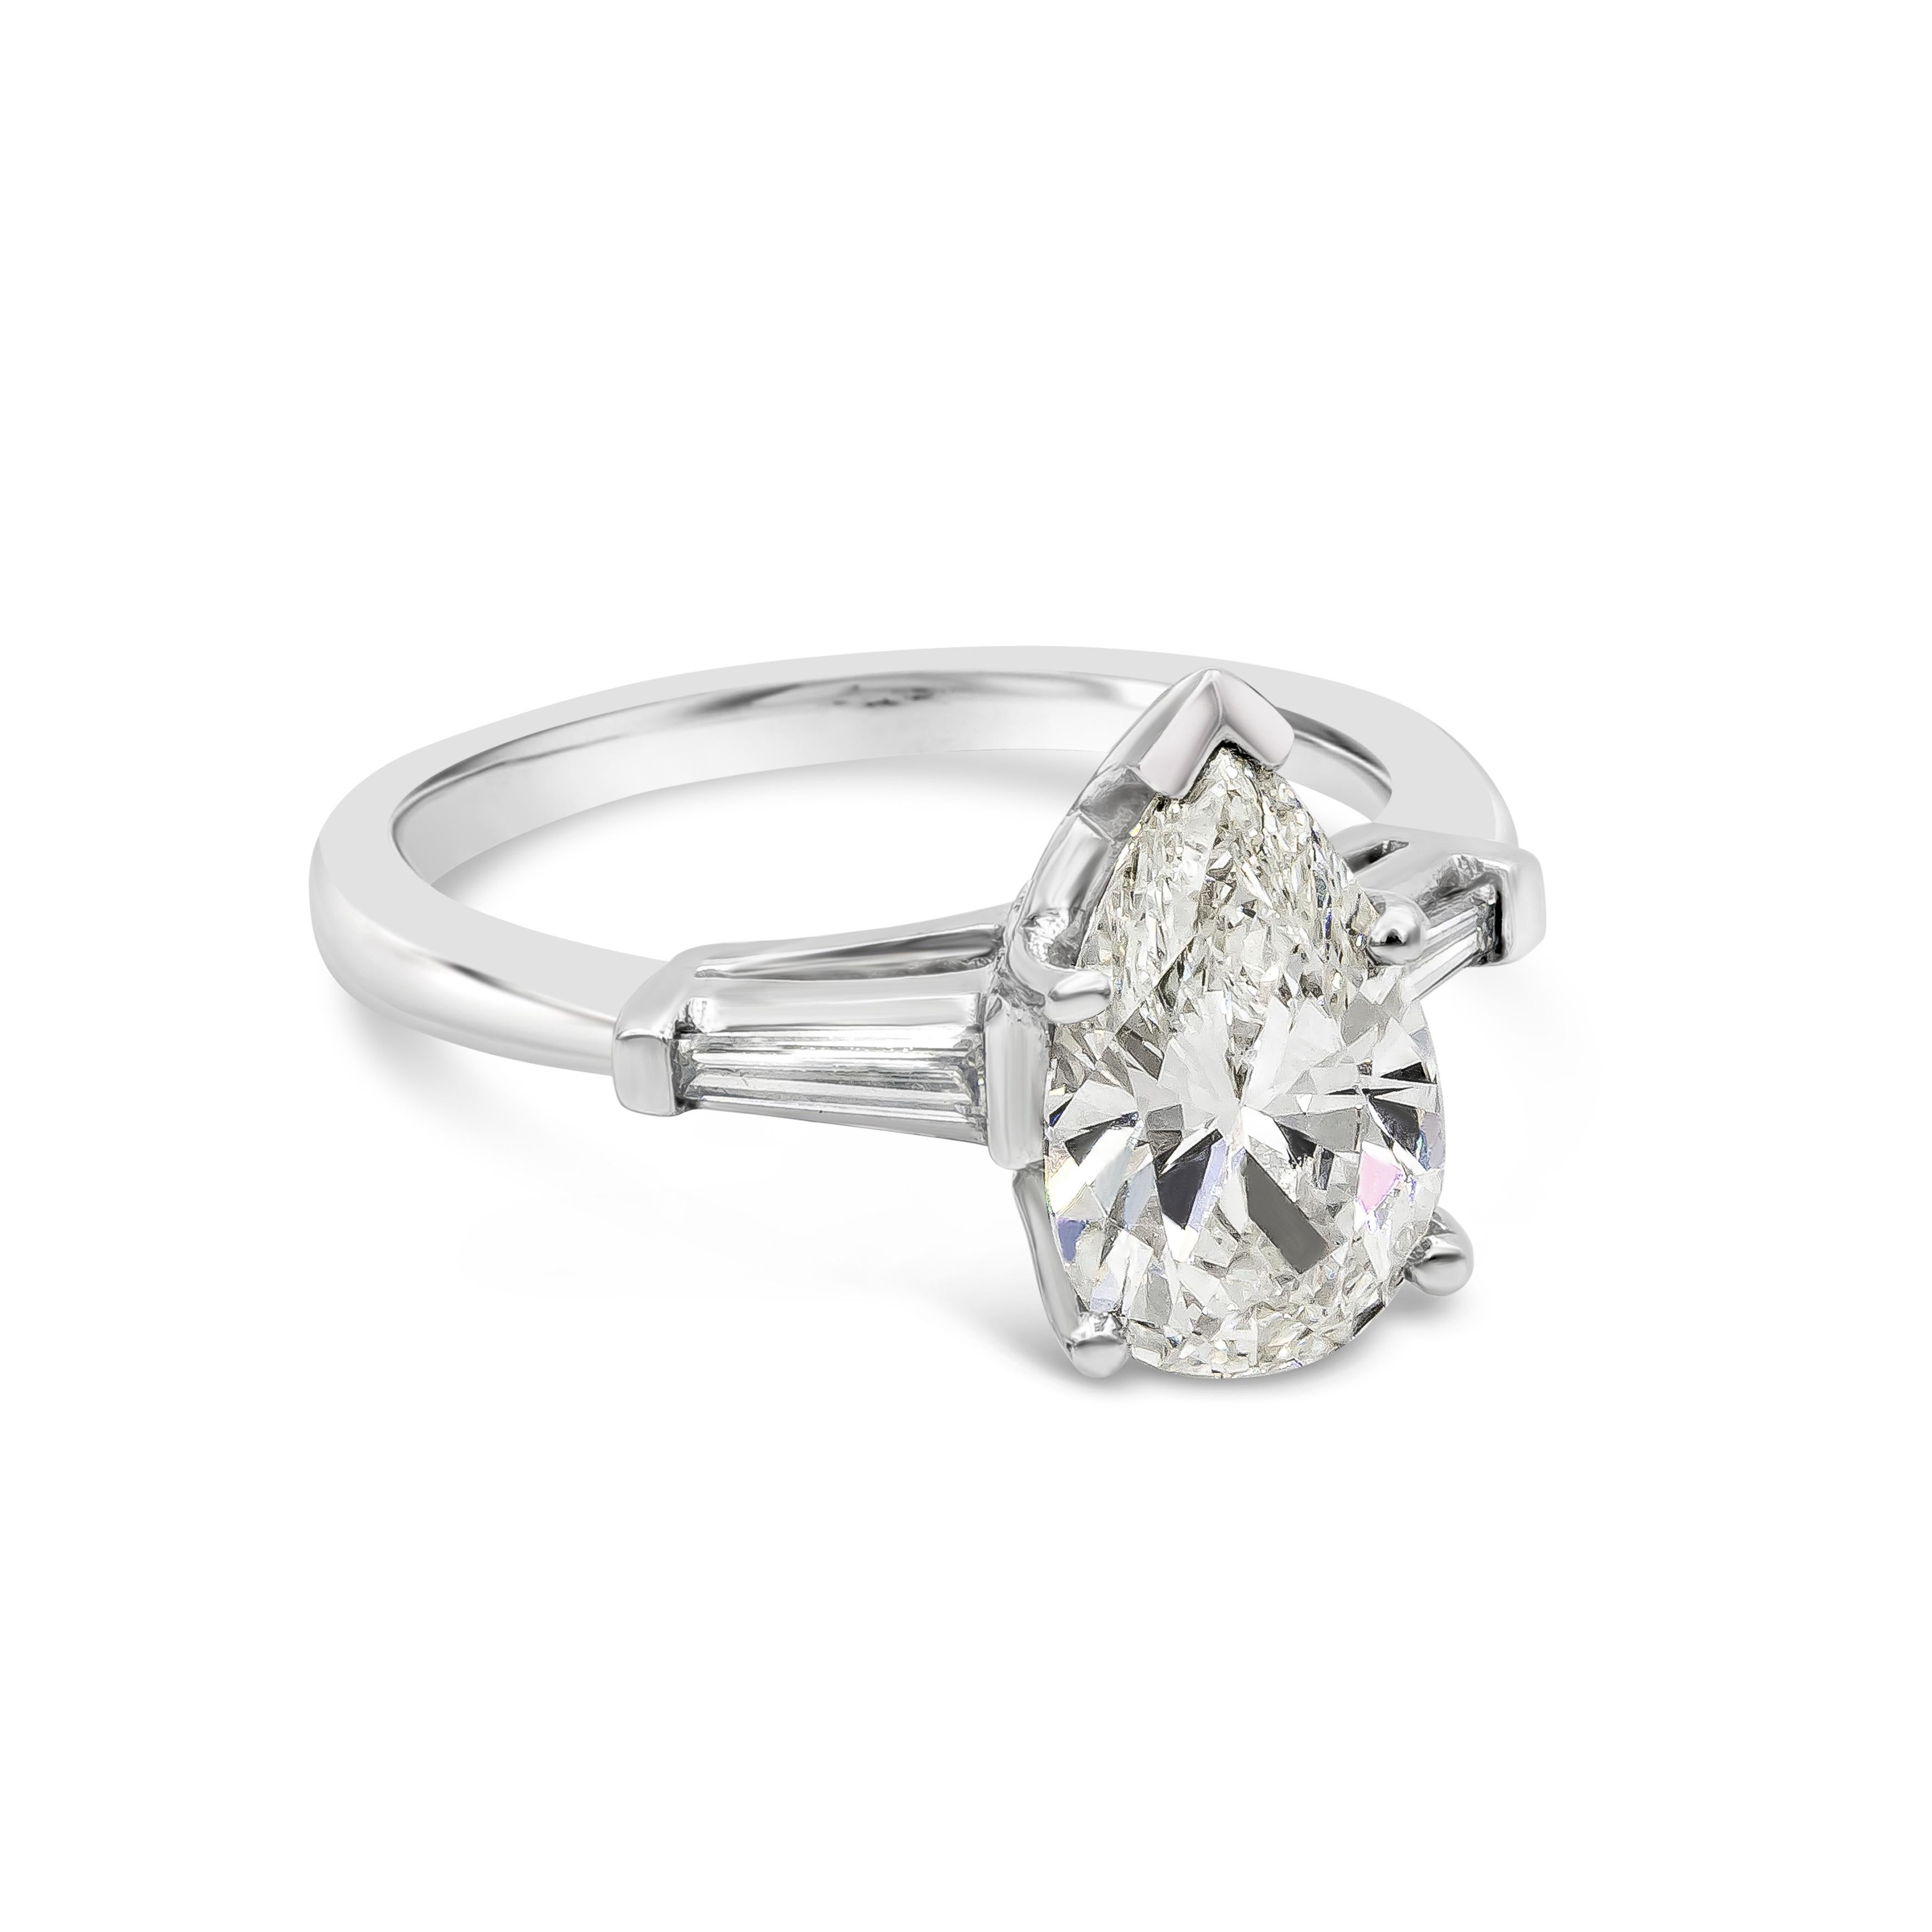 A classy and elegant three stone engagement ring style showcasing a 1.74 carats pear shape diamond center stone certified by GIA as I color, VS2 clarity. Flanking on each side are two tapered baguette cut diamonds, set in a platinum mounting. Size